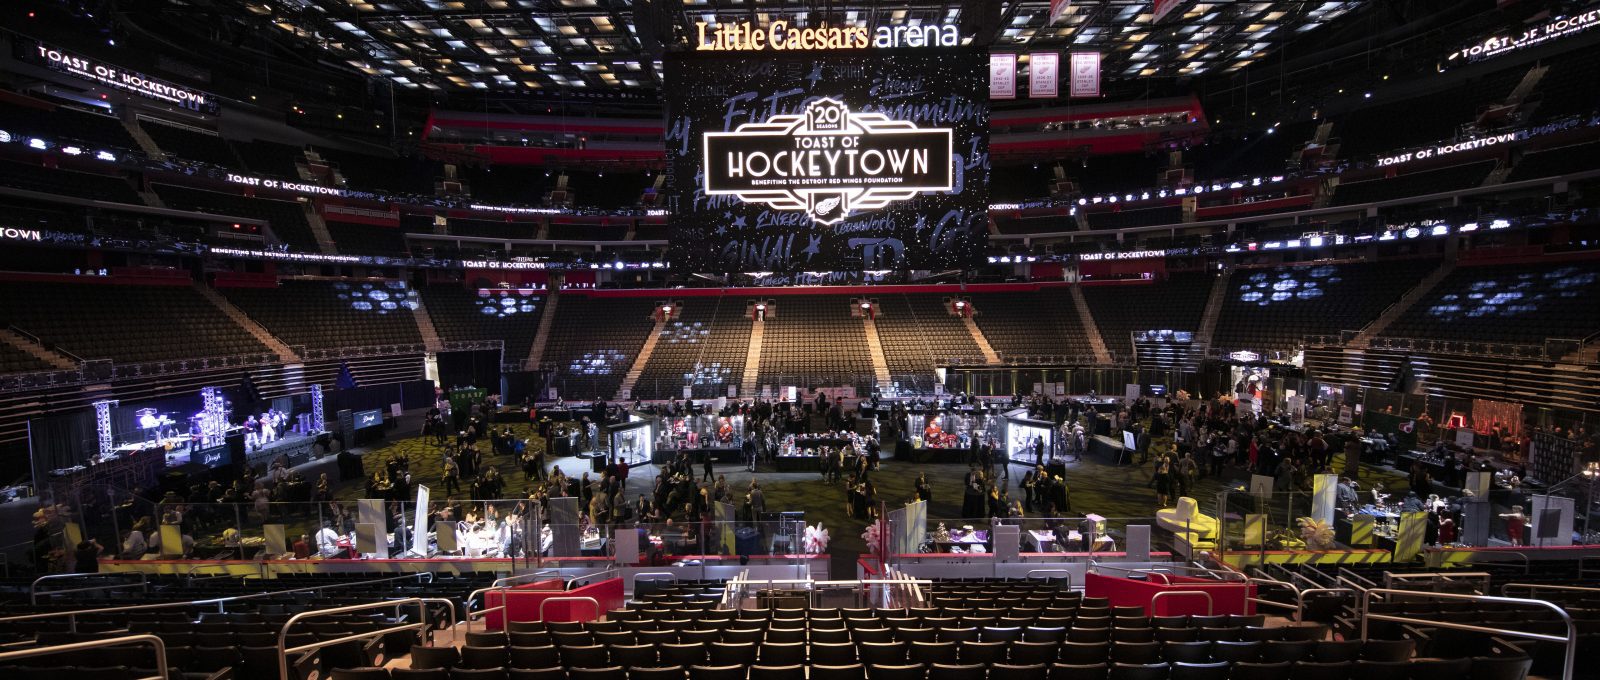 How StageRight Helps Little Caesars Arena Host Hockey and Basketball